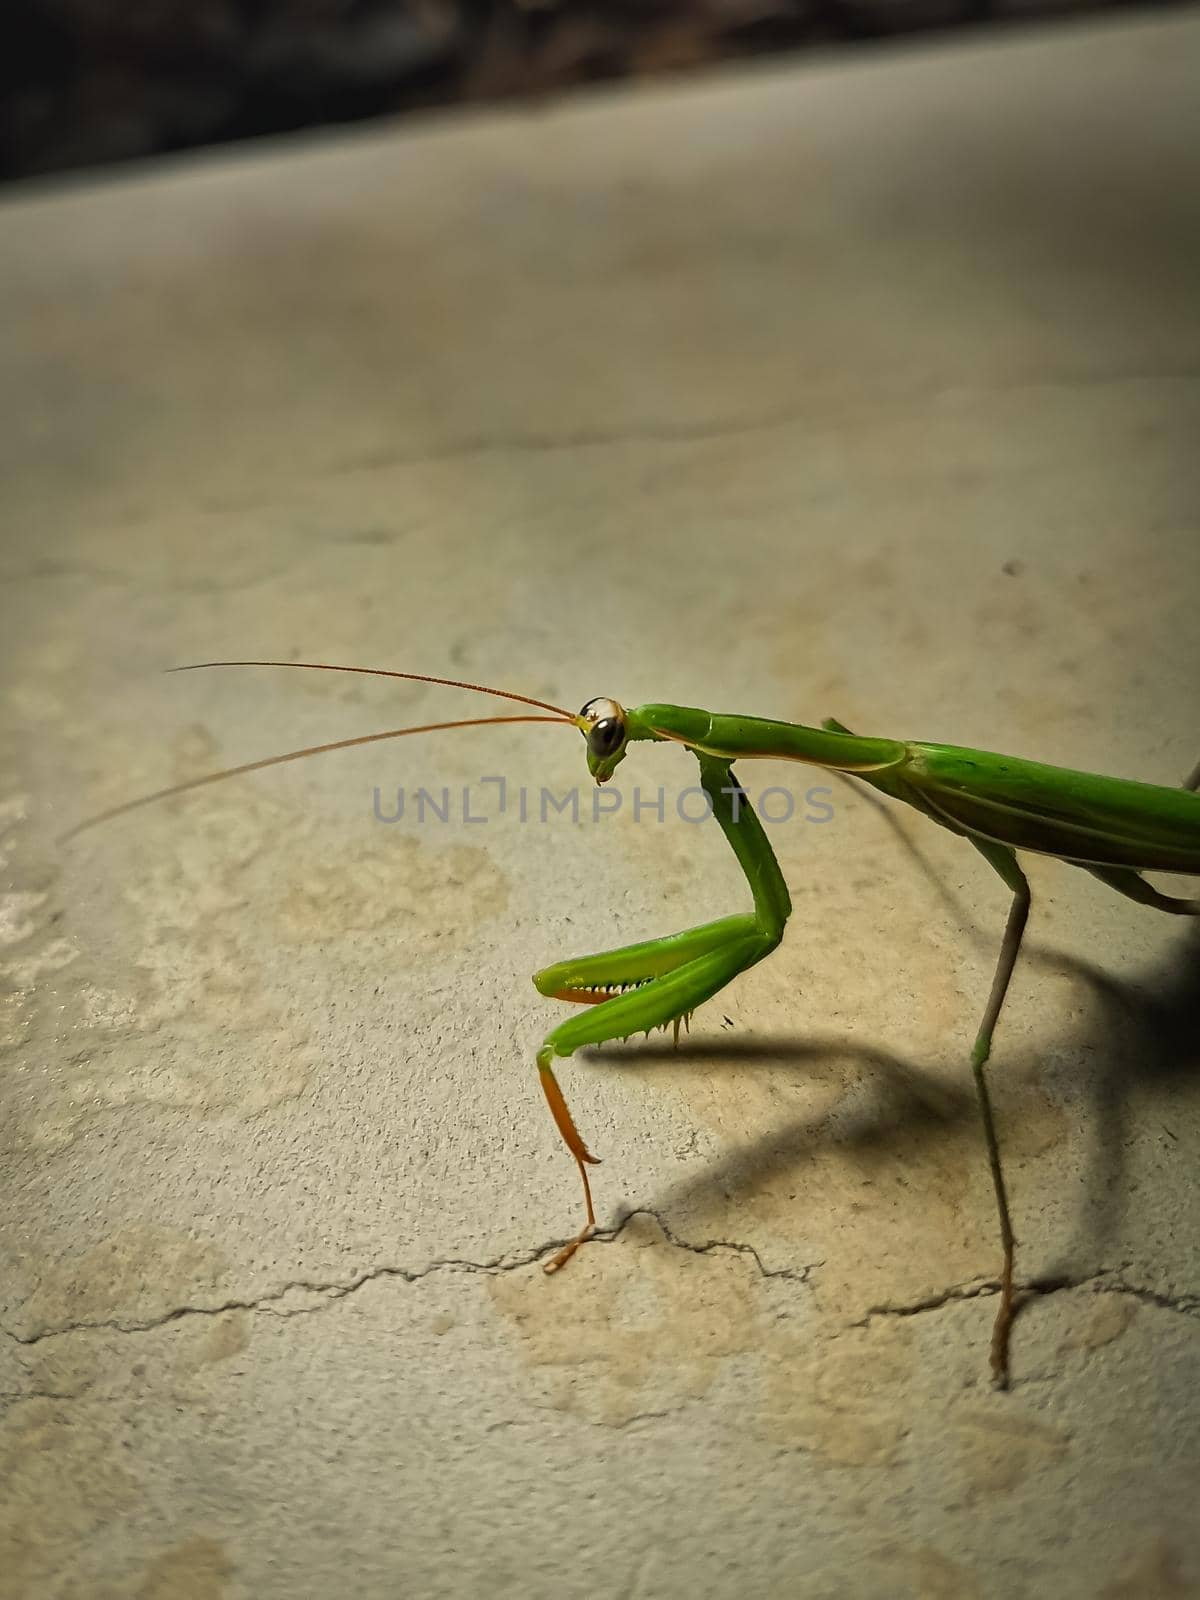 Vertical shot of a European mantis on a rough surface under the lights with a blurry background